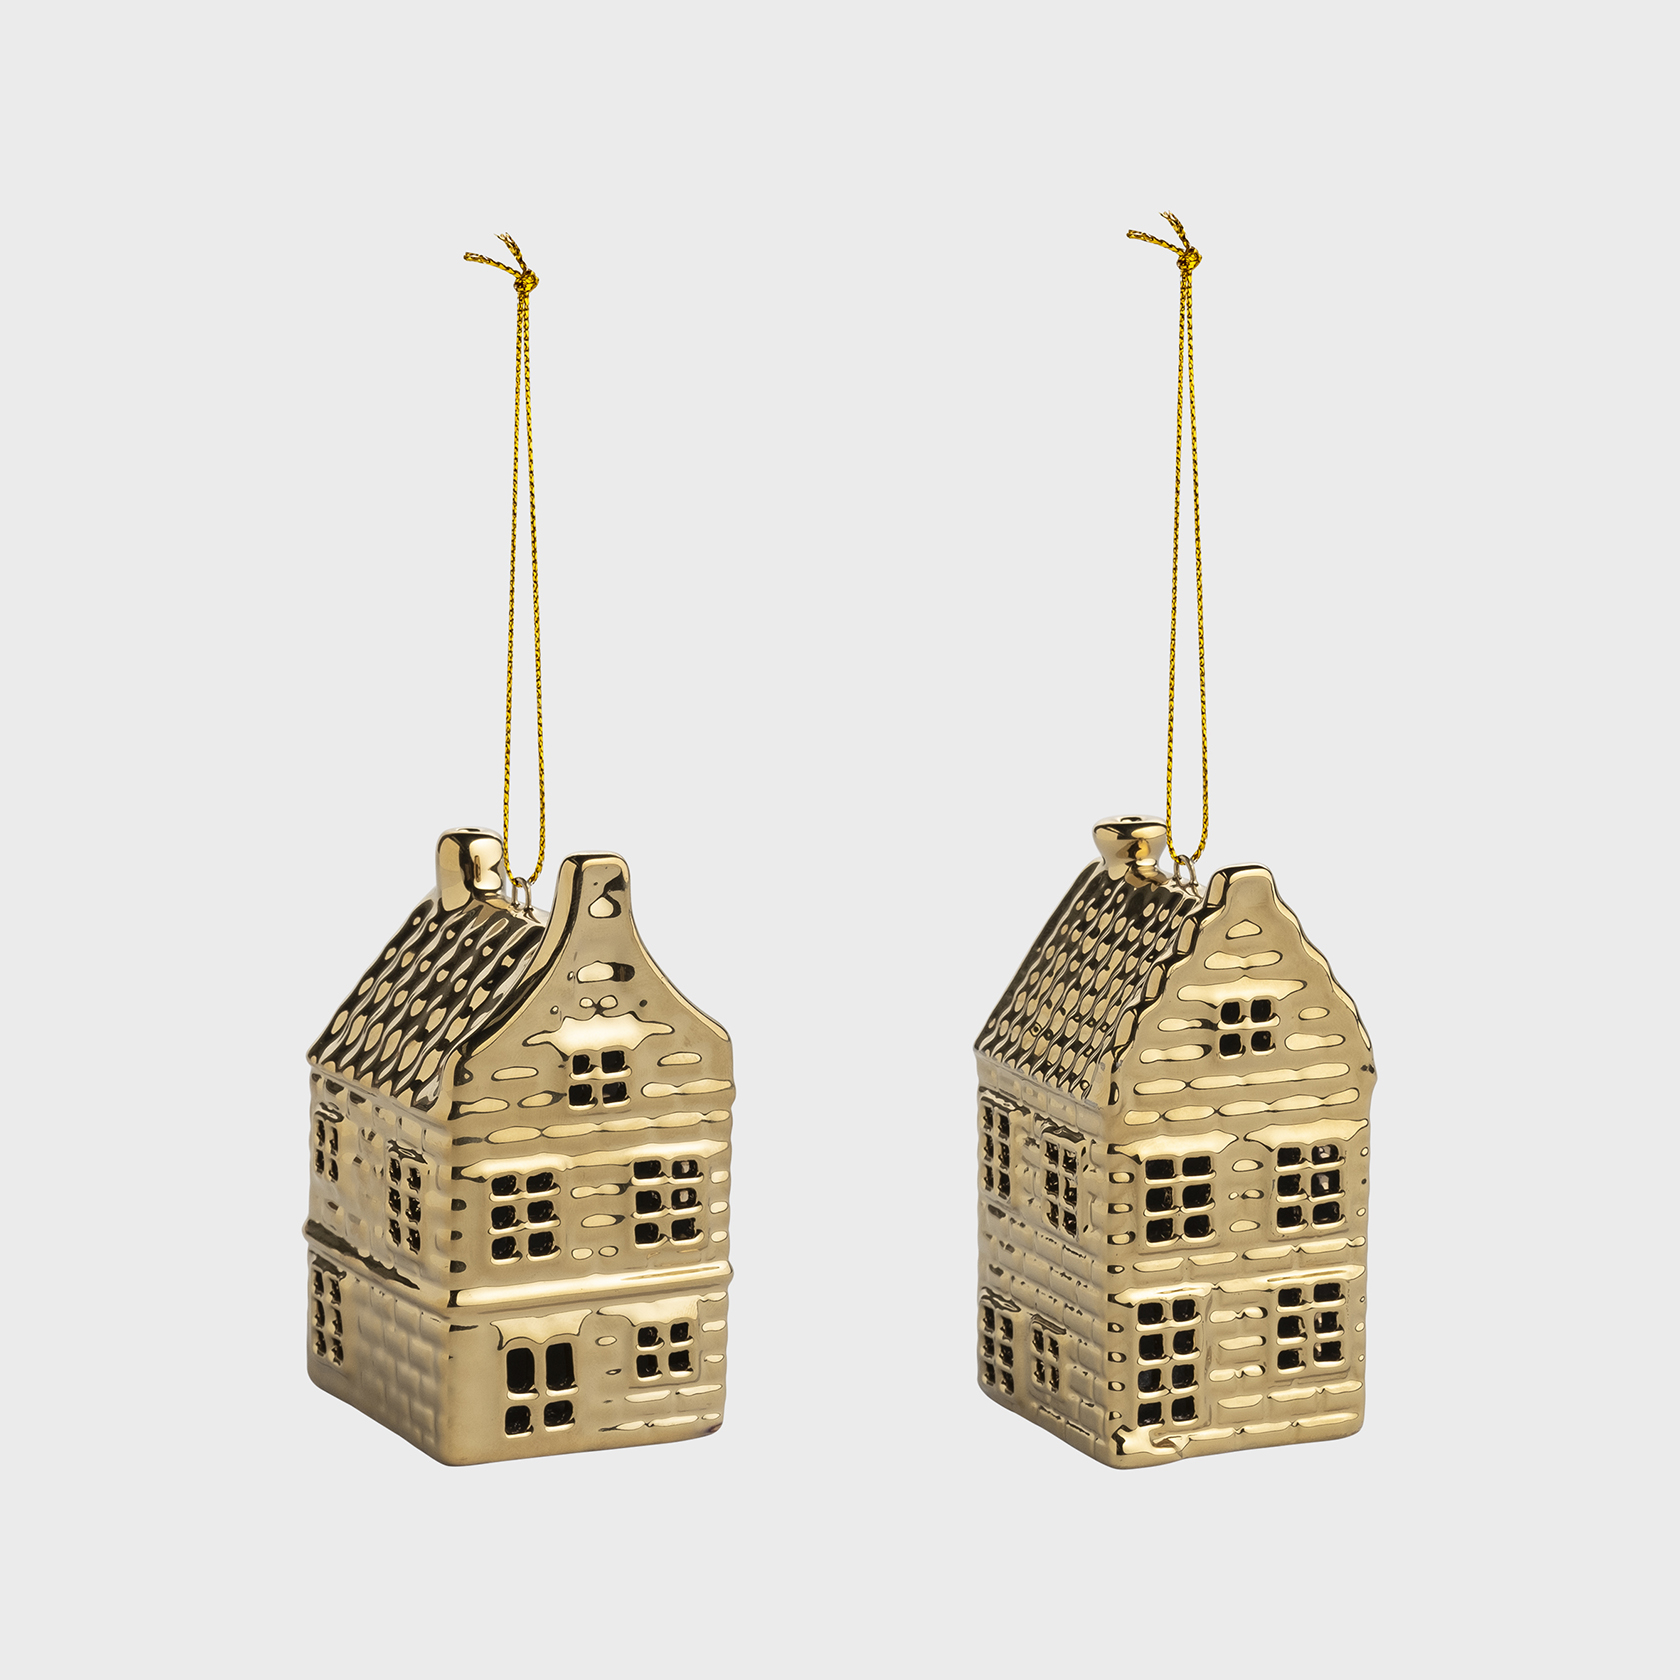 Ornament canal house gold set of 2